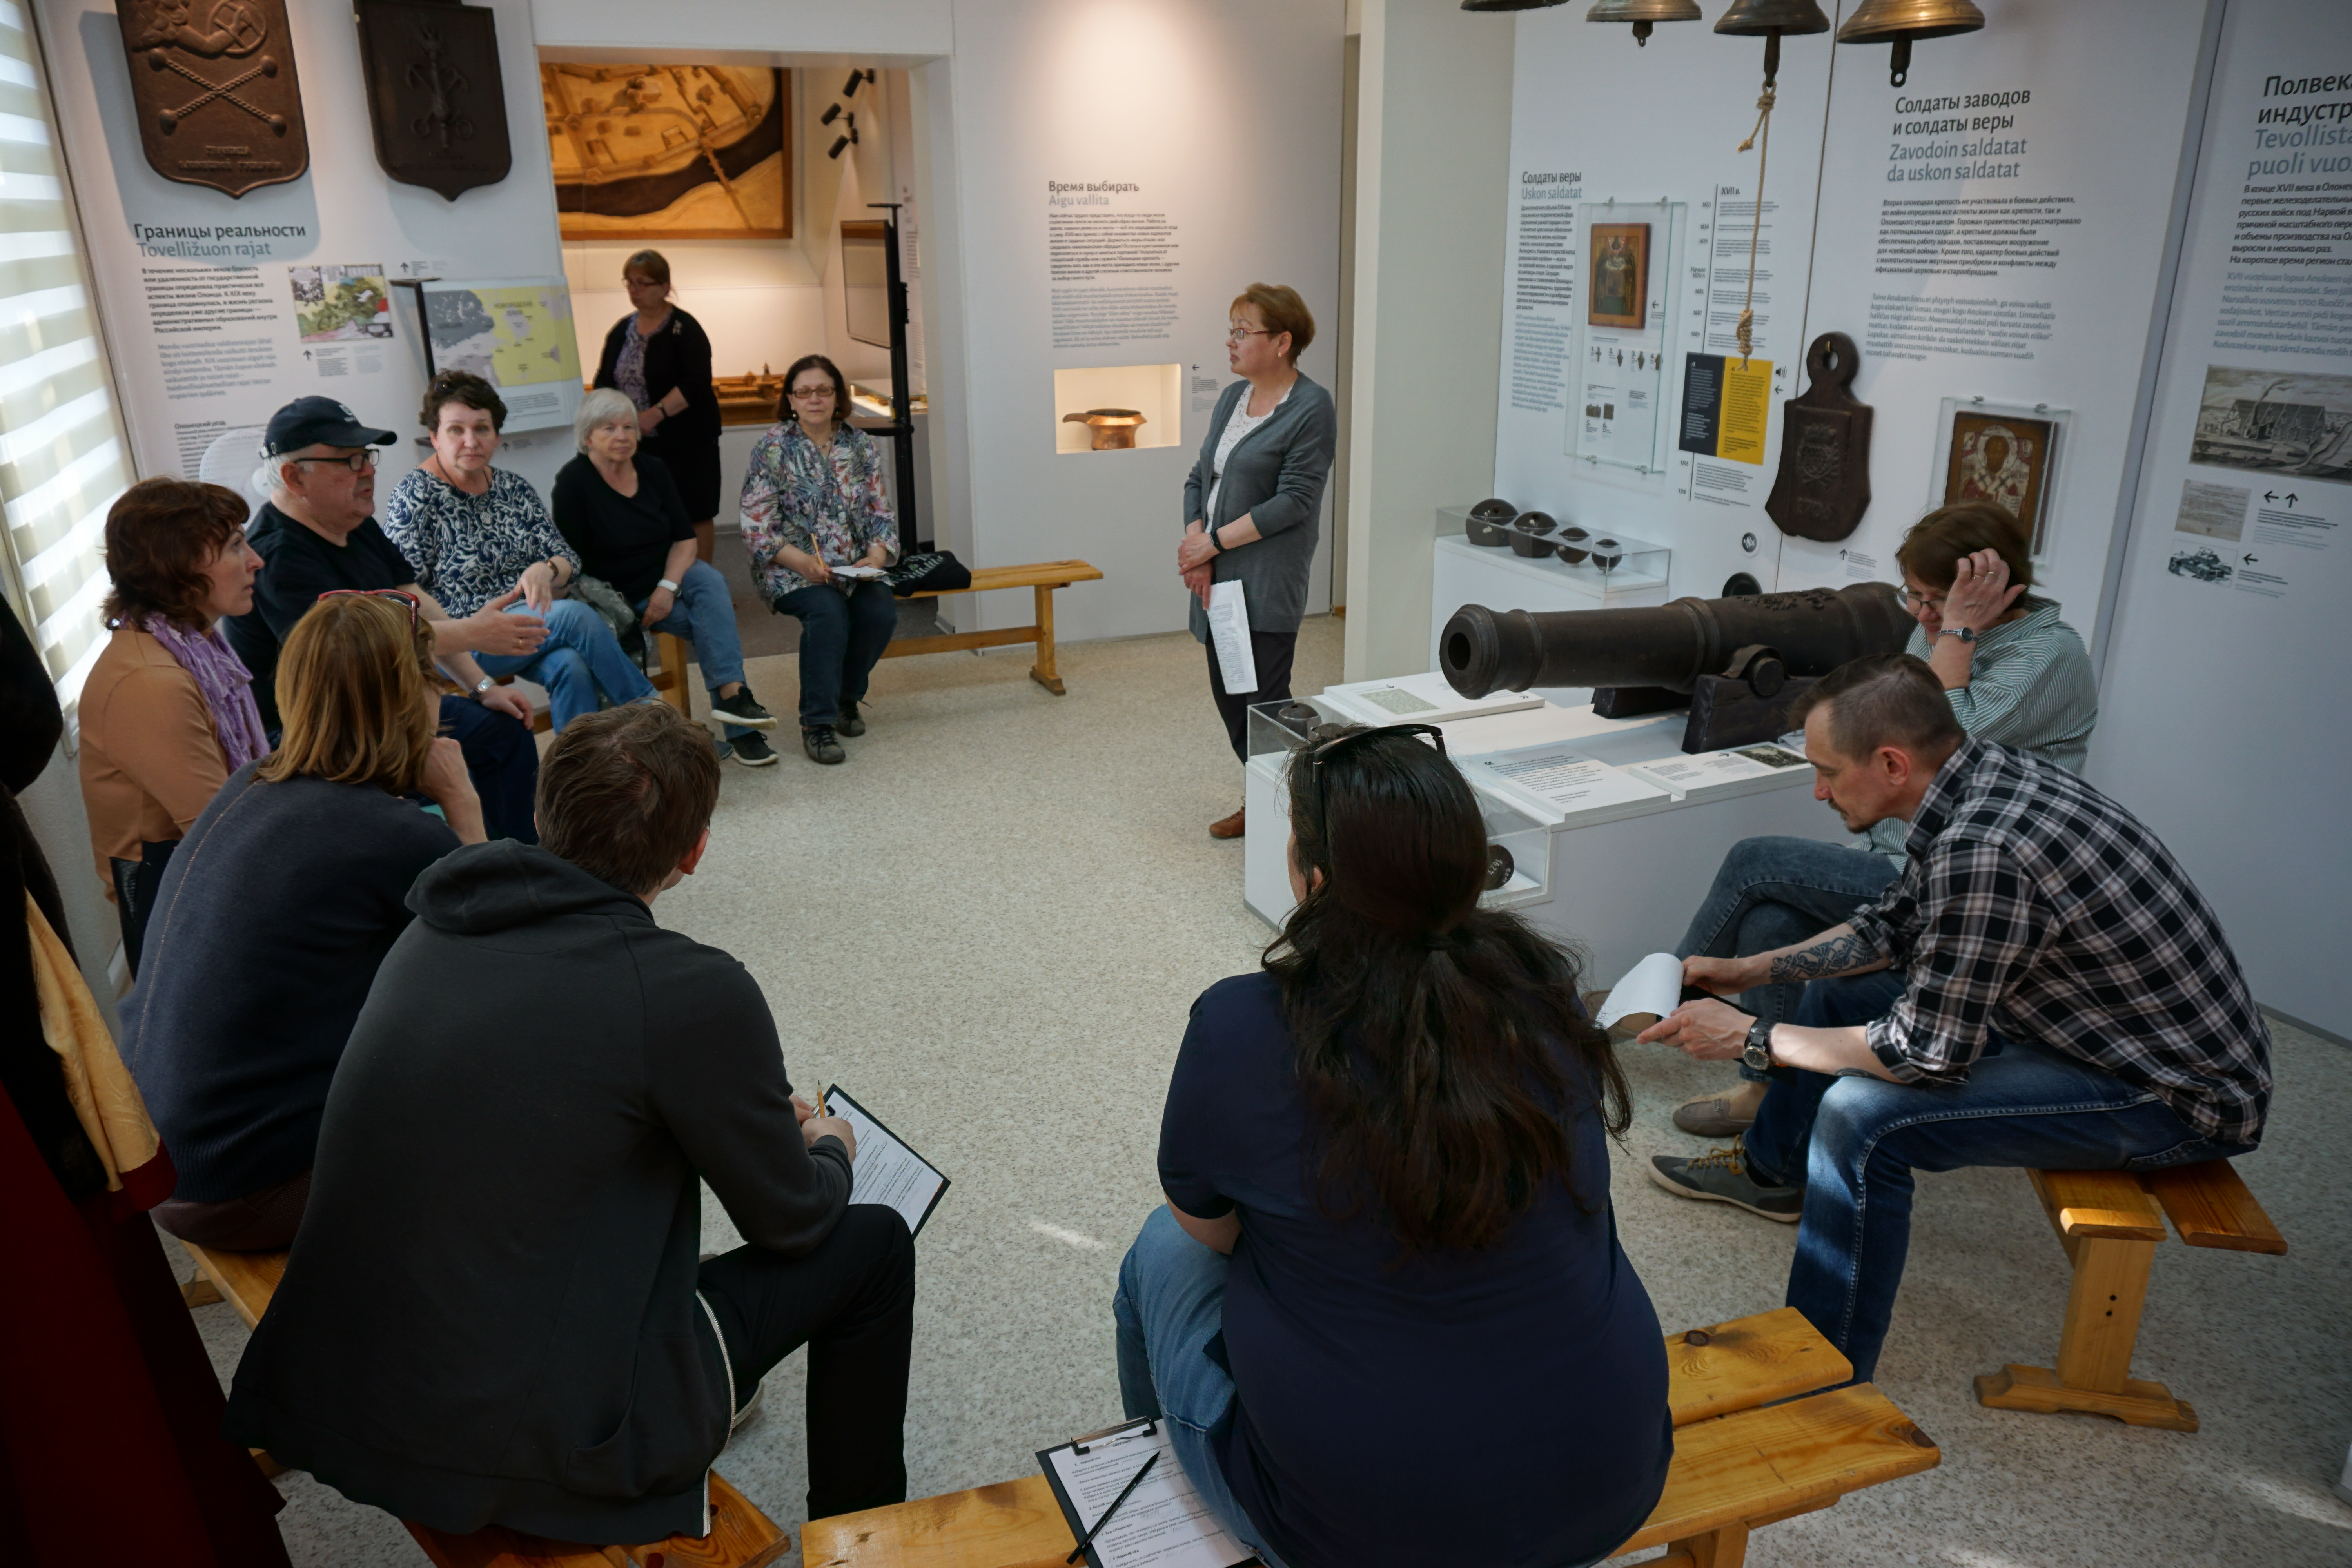 Museum workers got acquainted with the results of the InterActive History project 